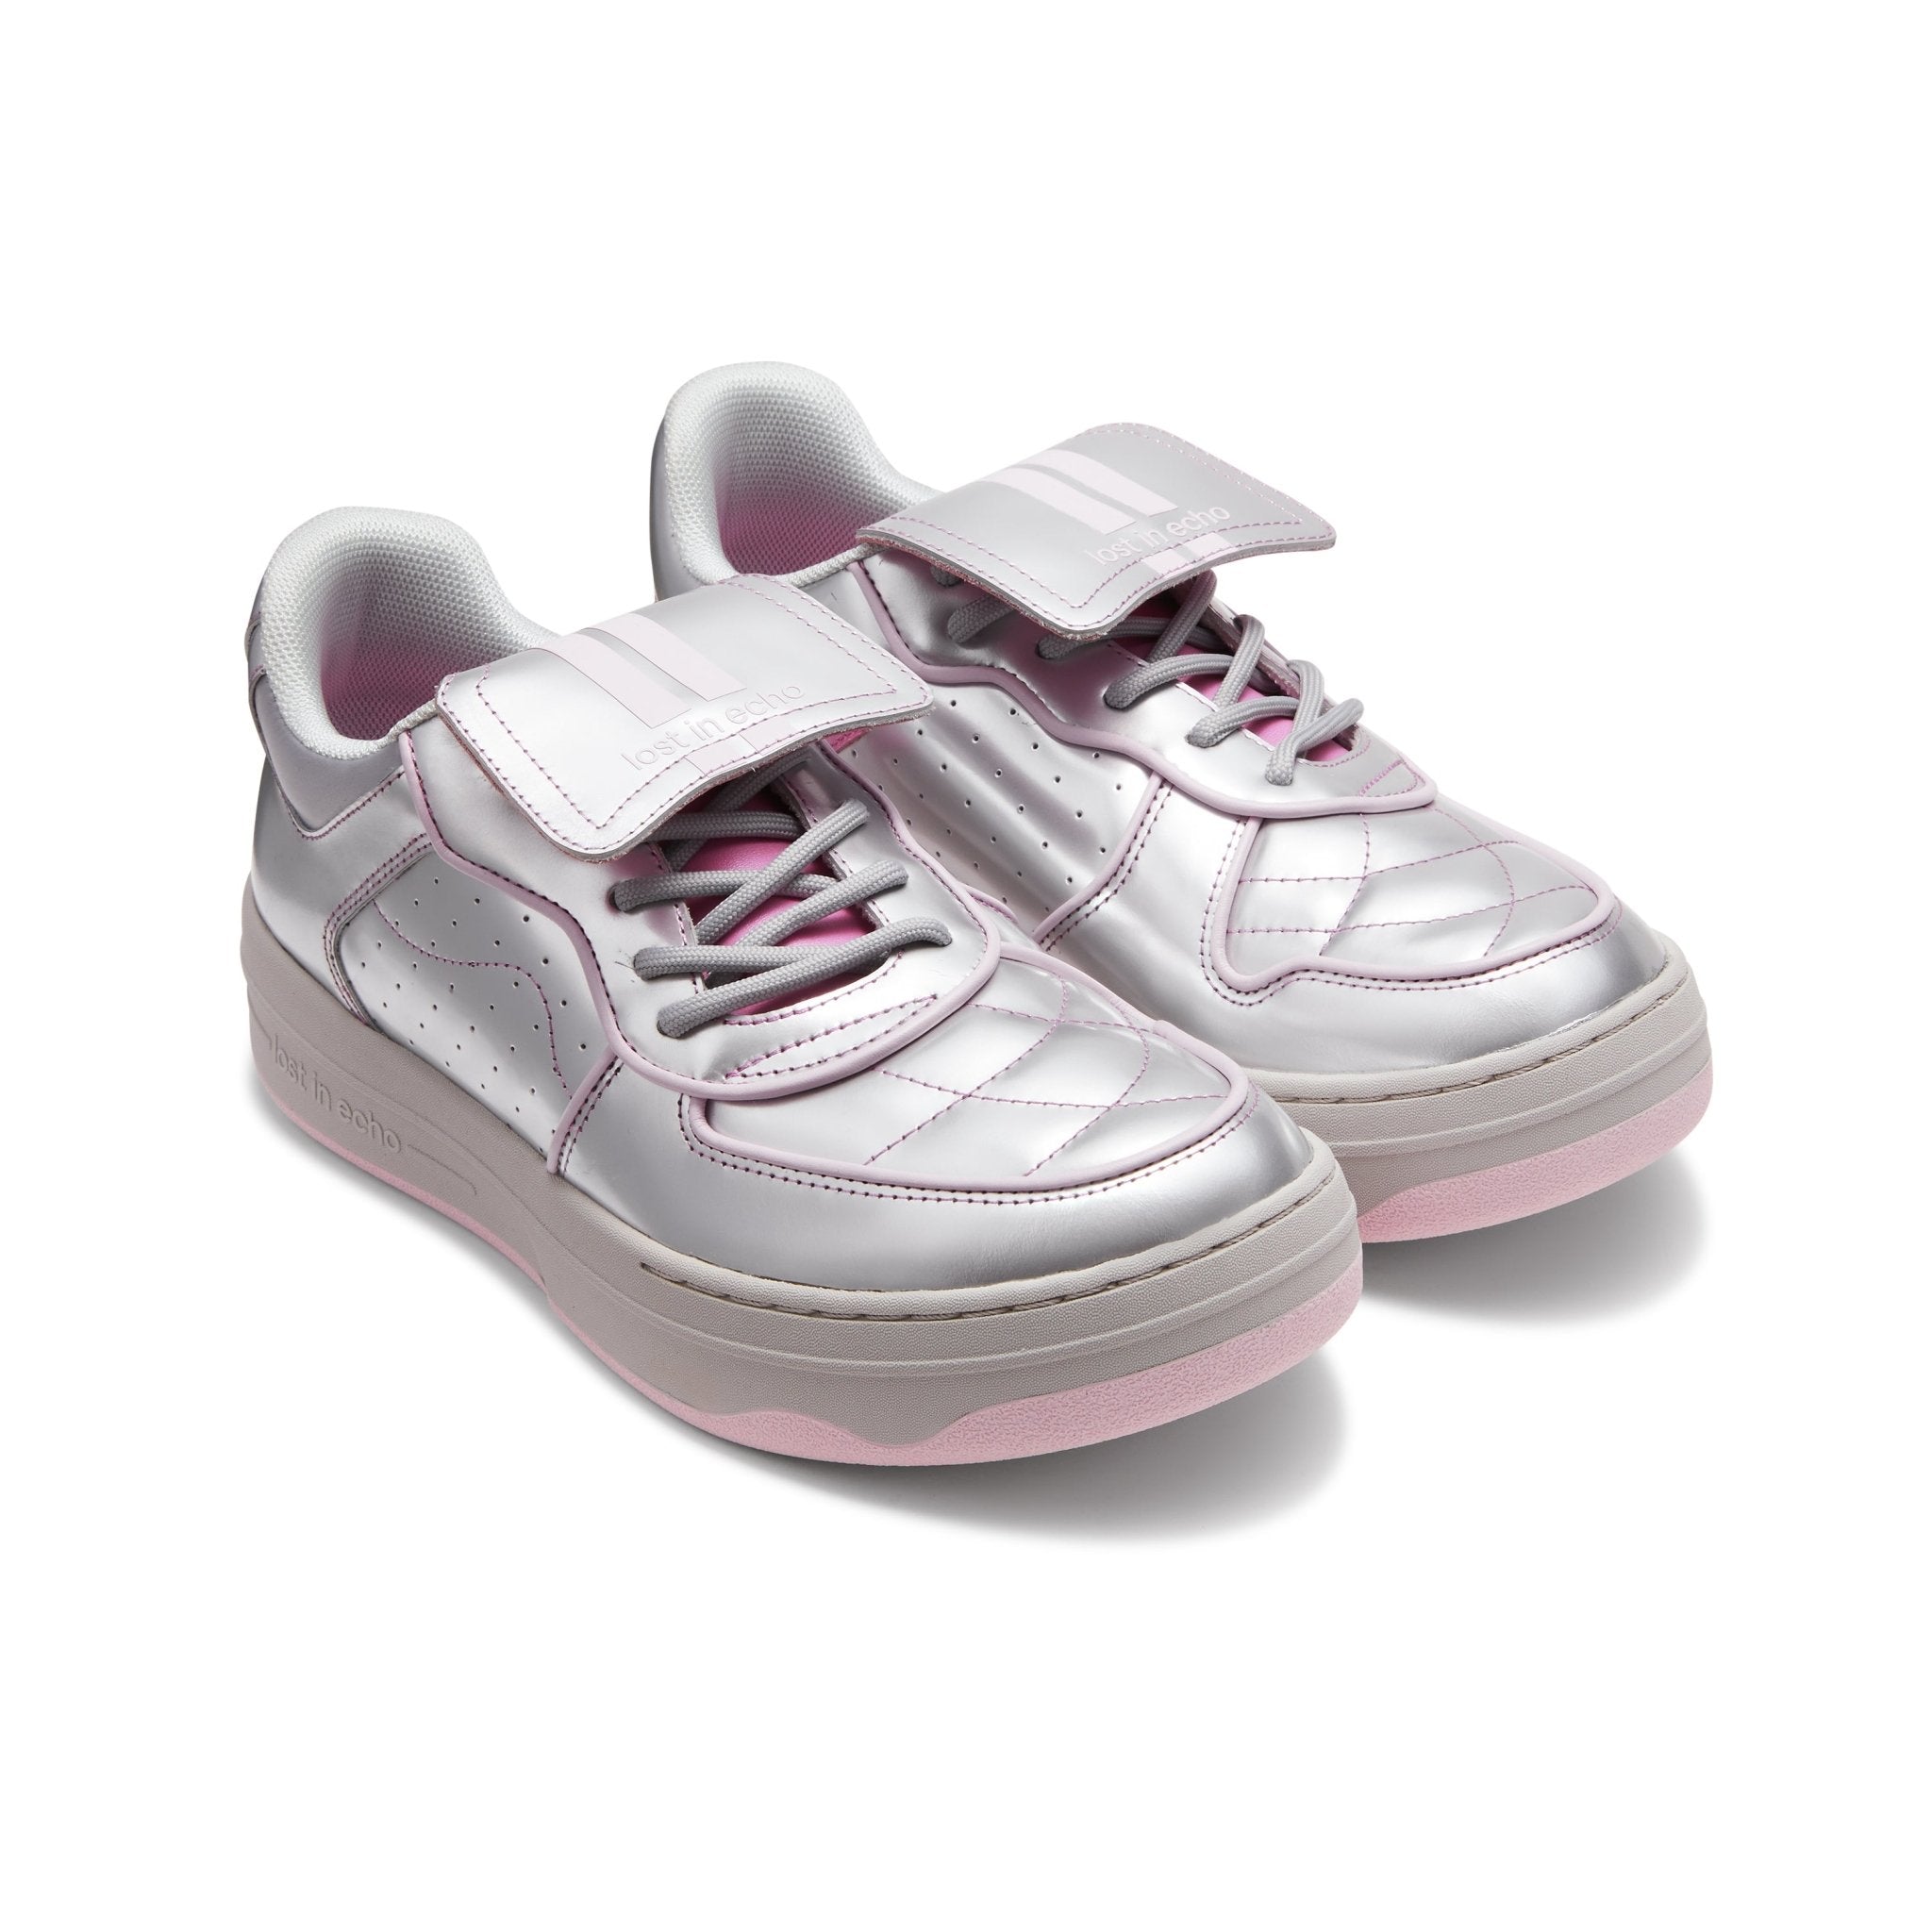 LOST IN ECHO Silver Thick Sole Skateboard Shoes | MADA IN CHINA